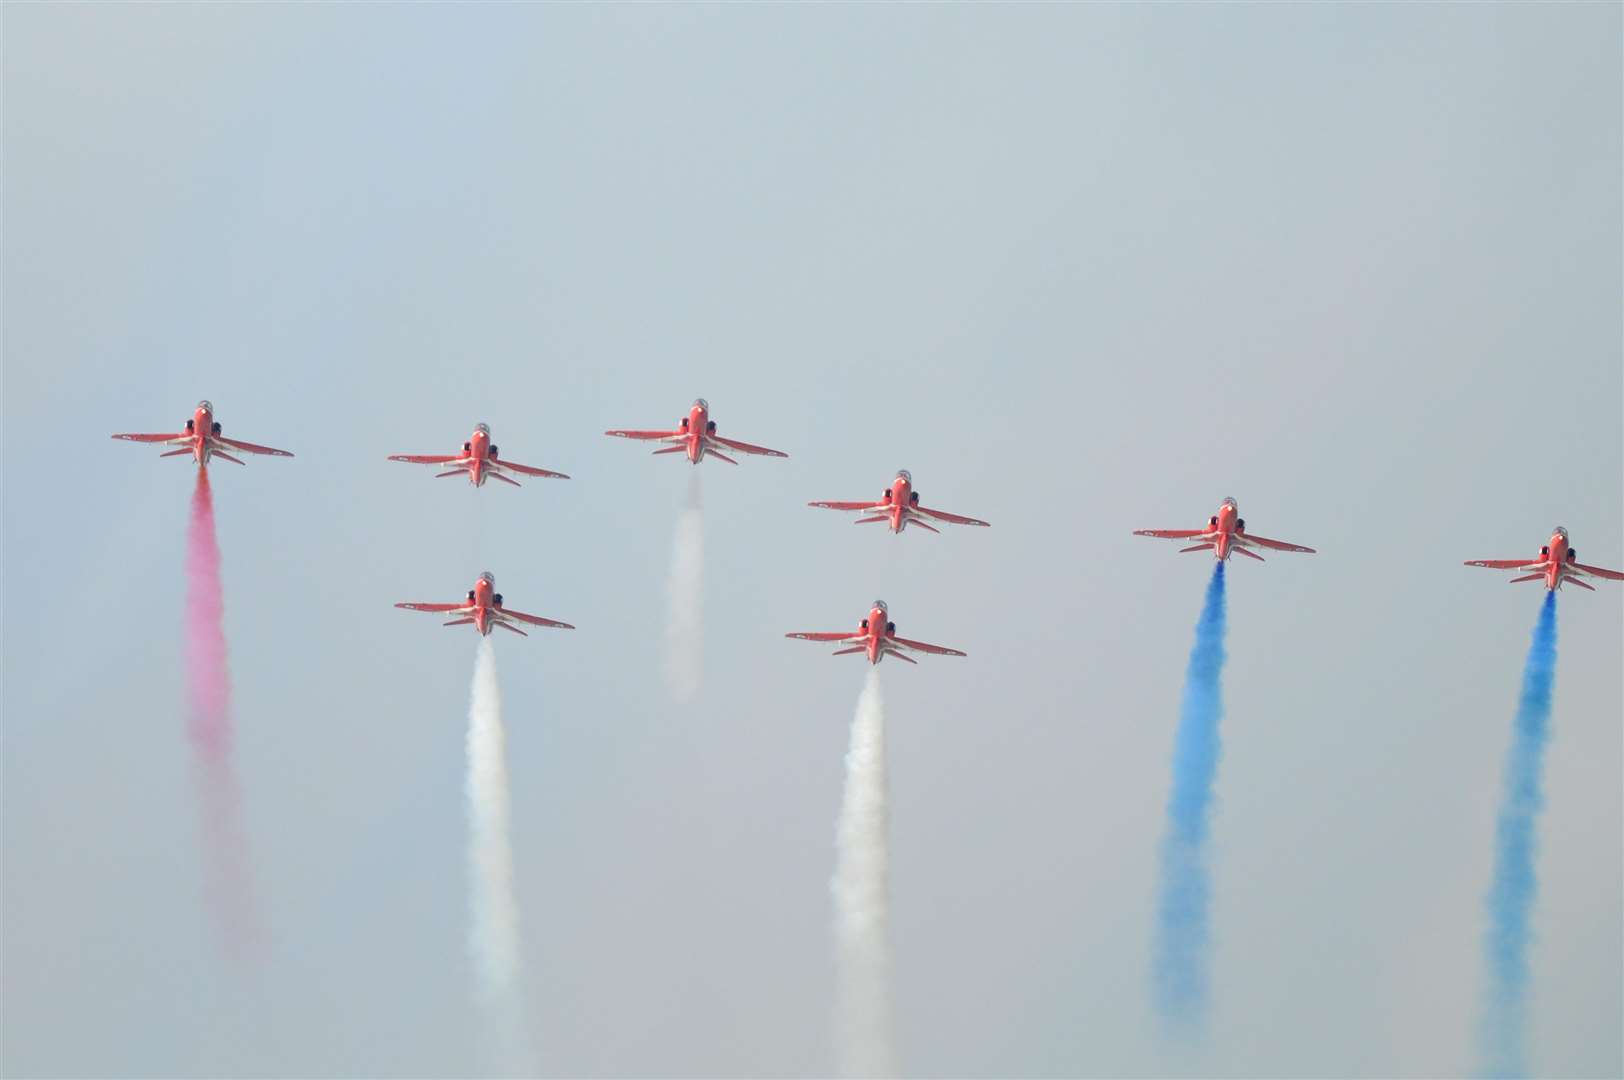 Action from a previous Herne Bay Air Show